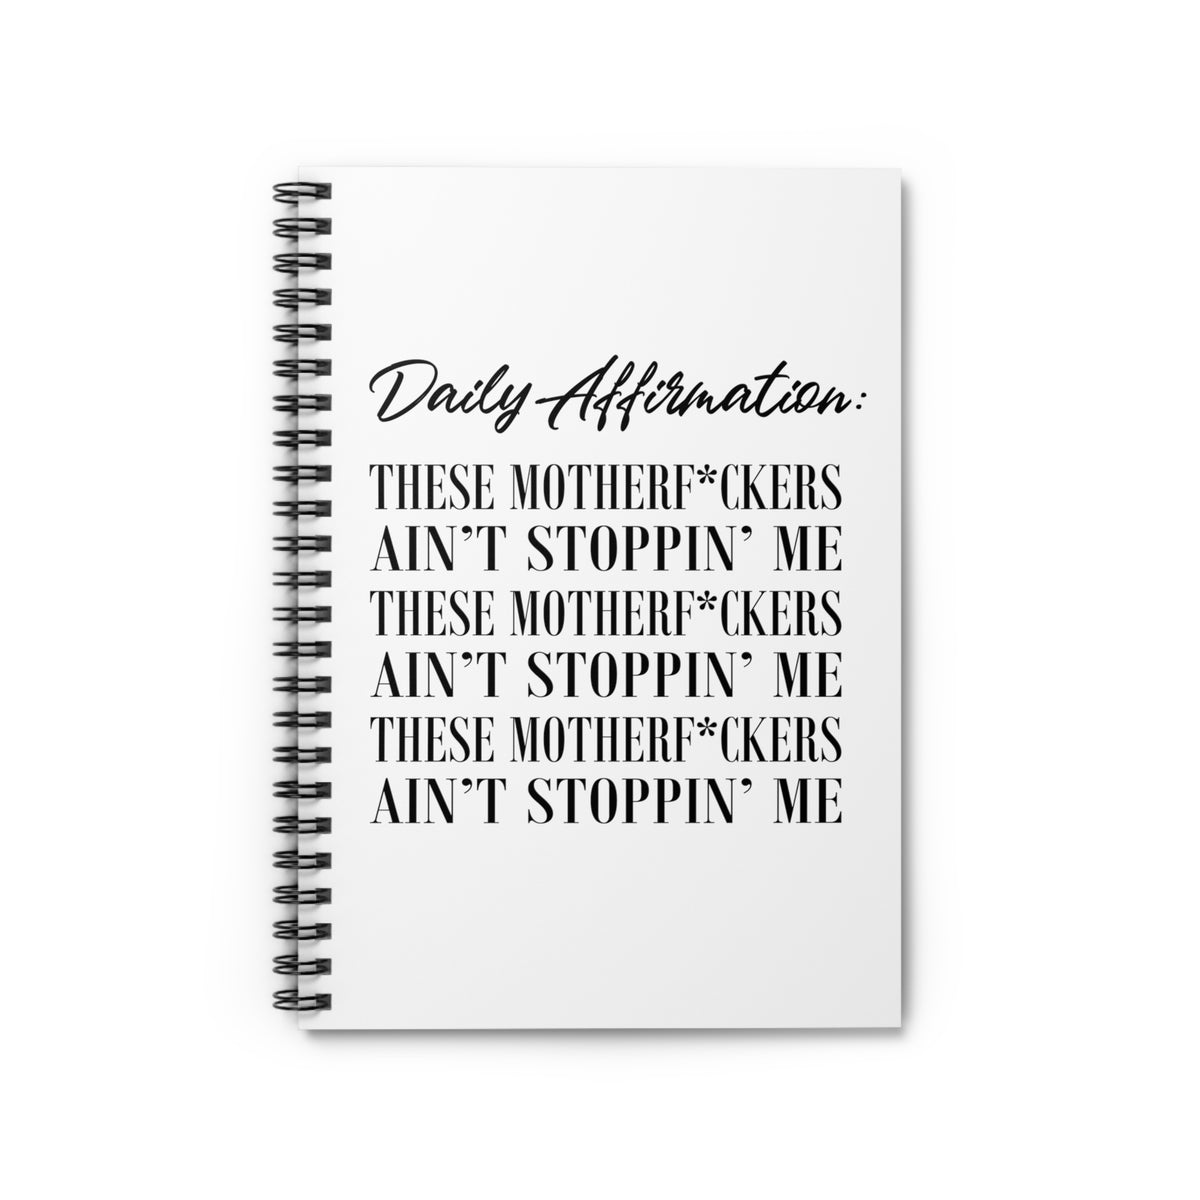 Daily Affirmation: The Motherf*ckers Ain Stoppin' Me Spiral Notebook